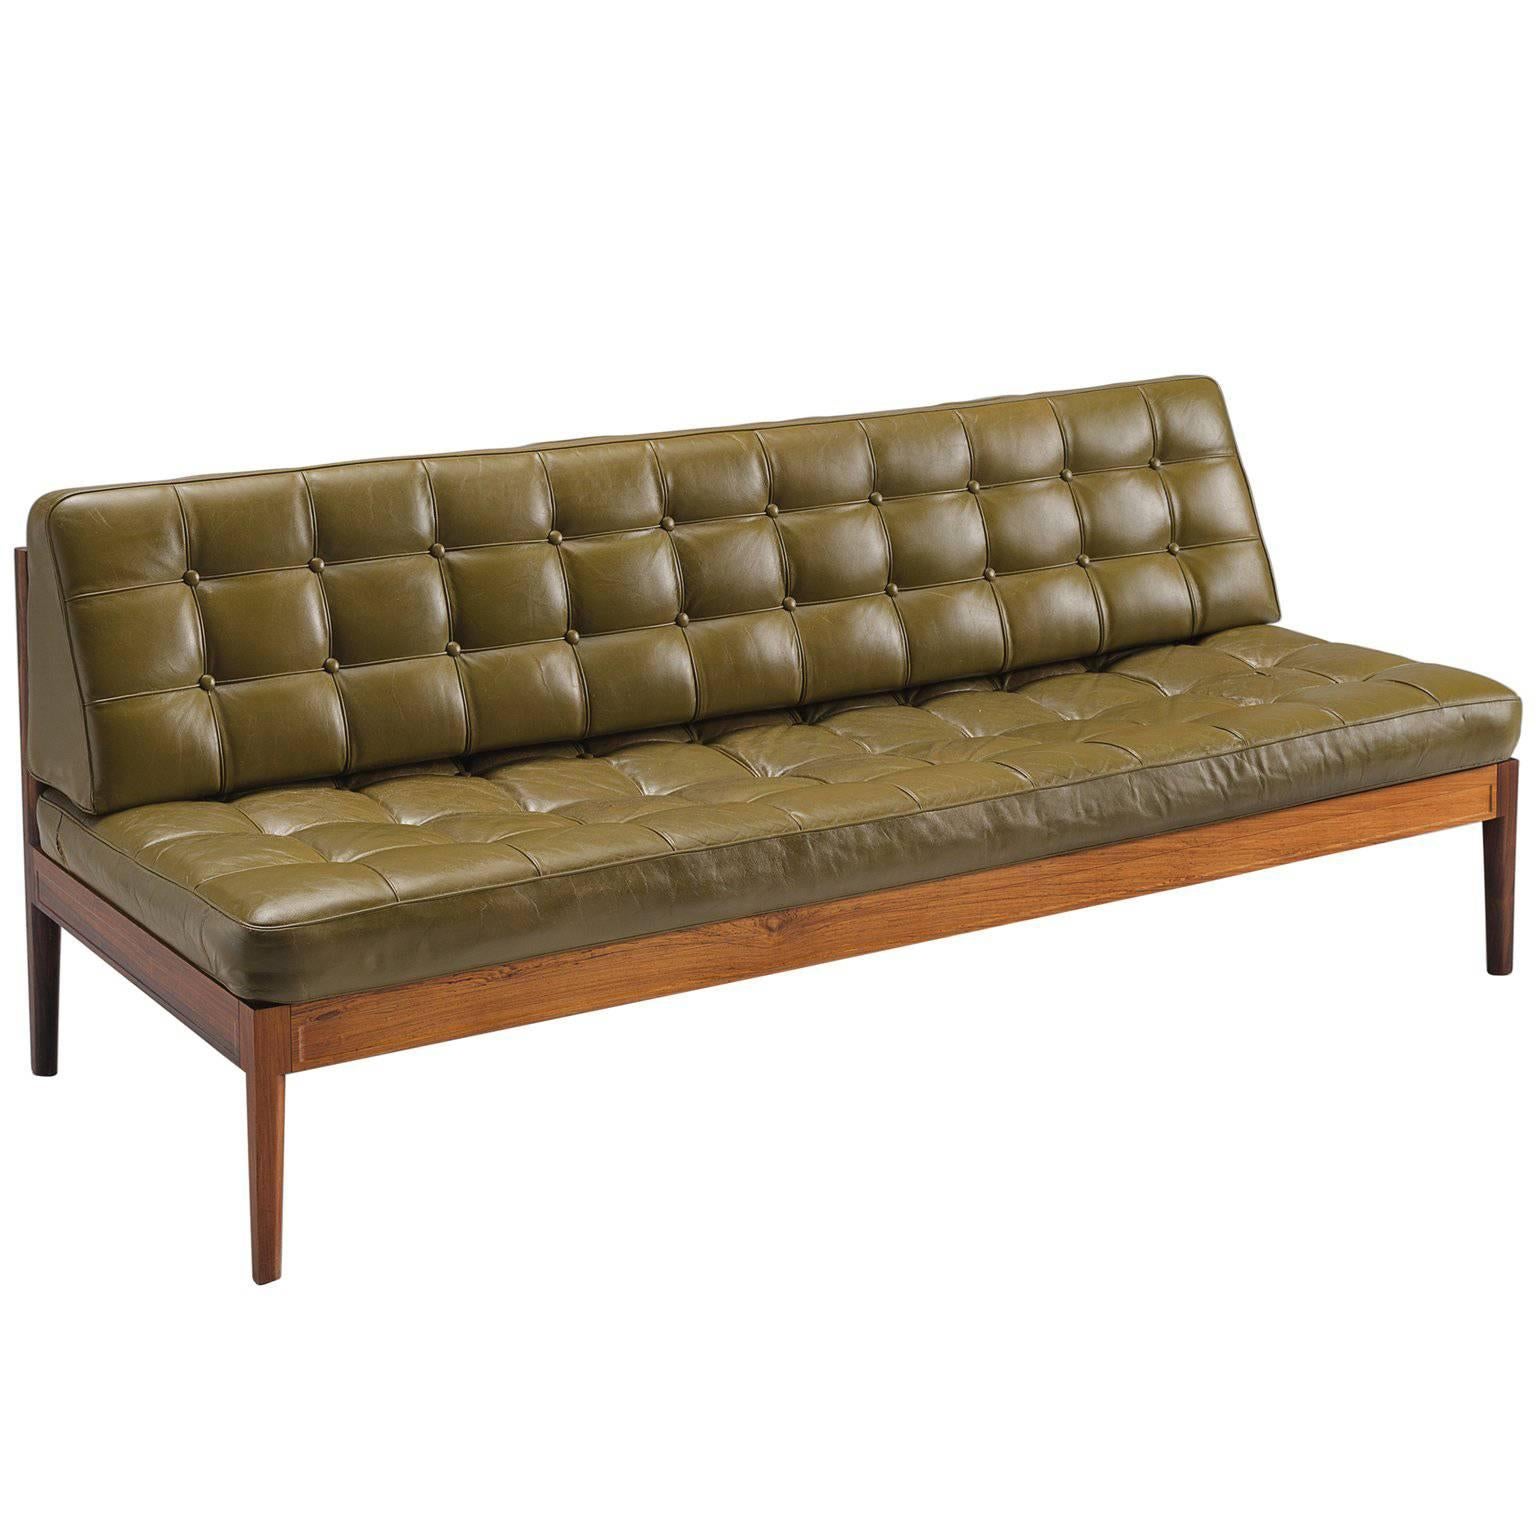 Finn Juhl 'Diplomat' Sofa in Olive Green Leather and Rosewood